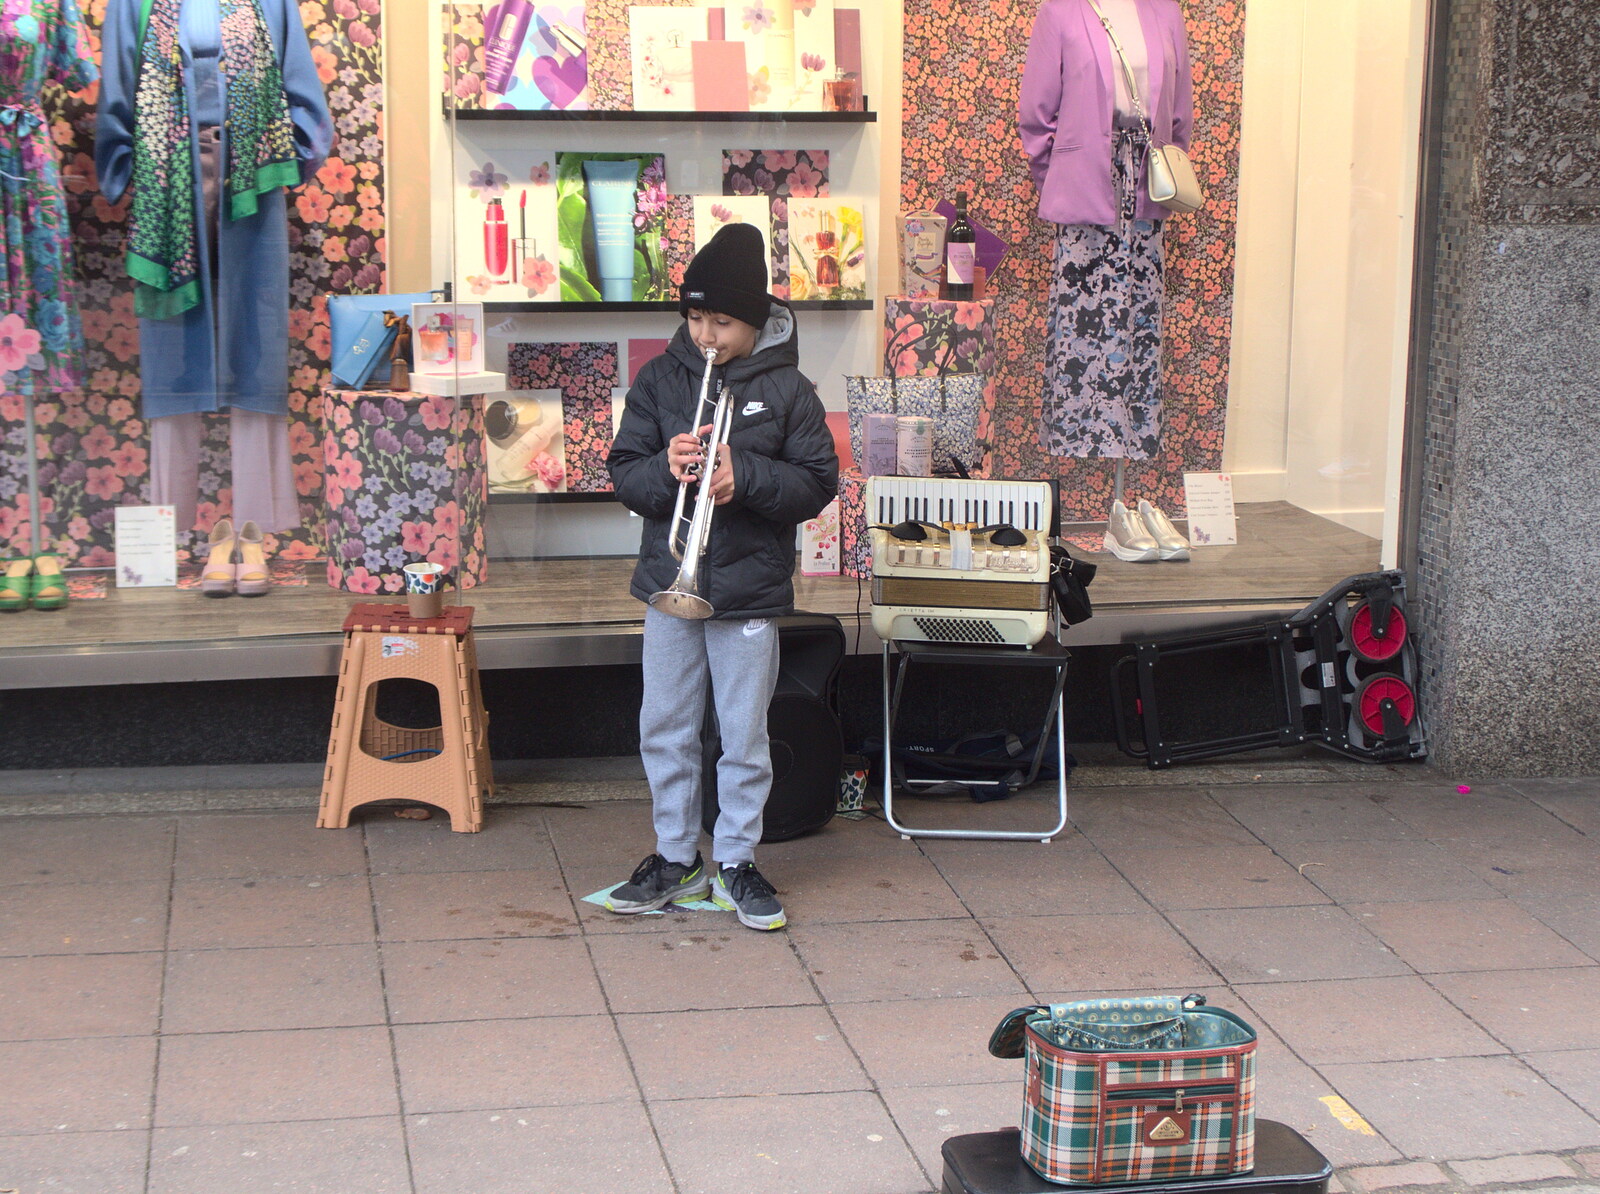 The Detectorists, and a Trip to the Market, Norwich - 25th February 2023: A young lad plays some amazing trumpet